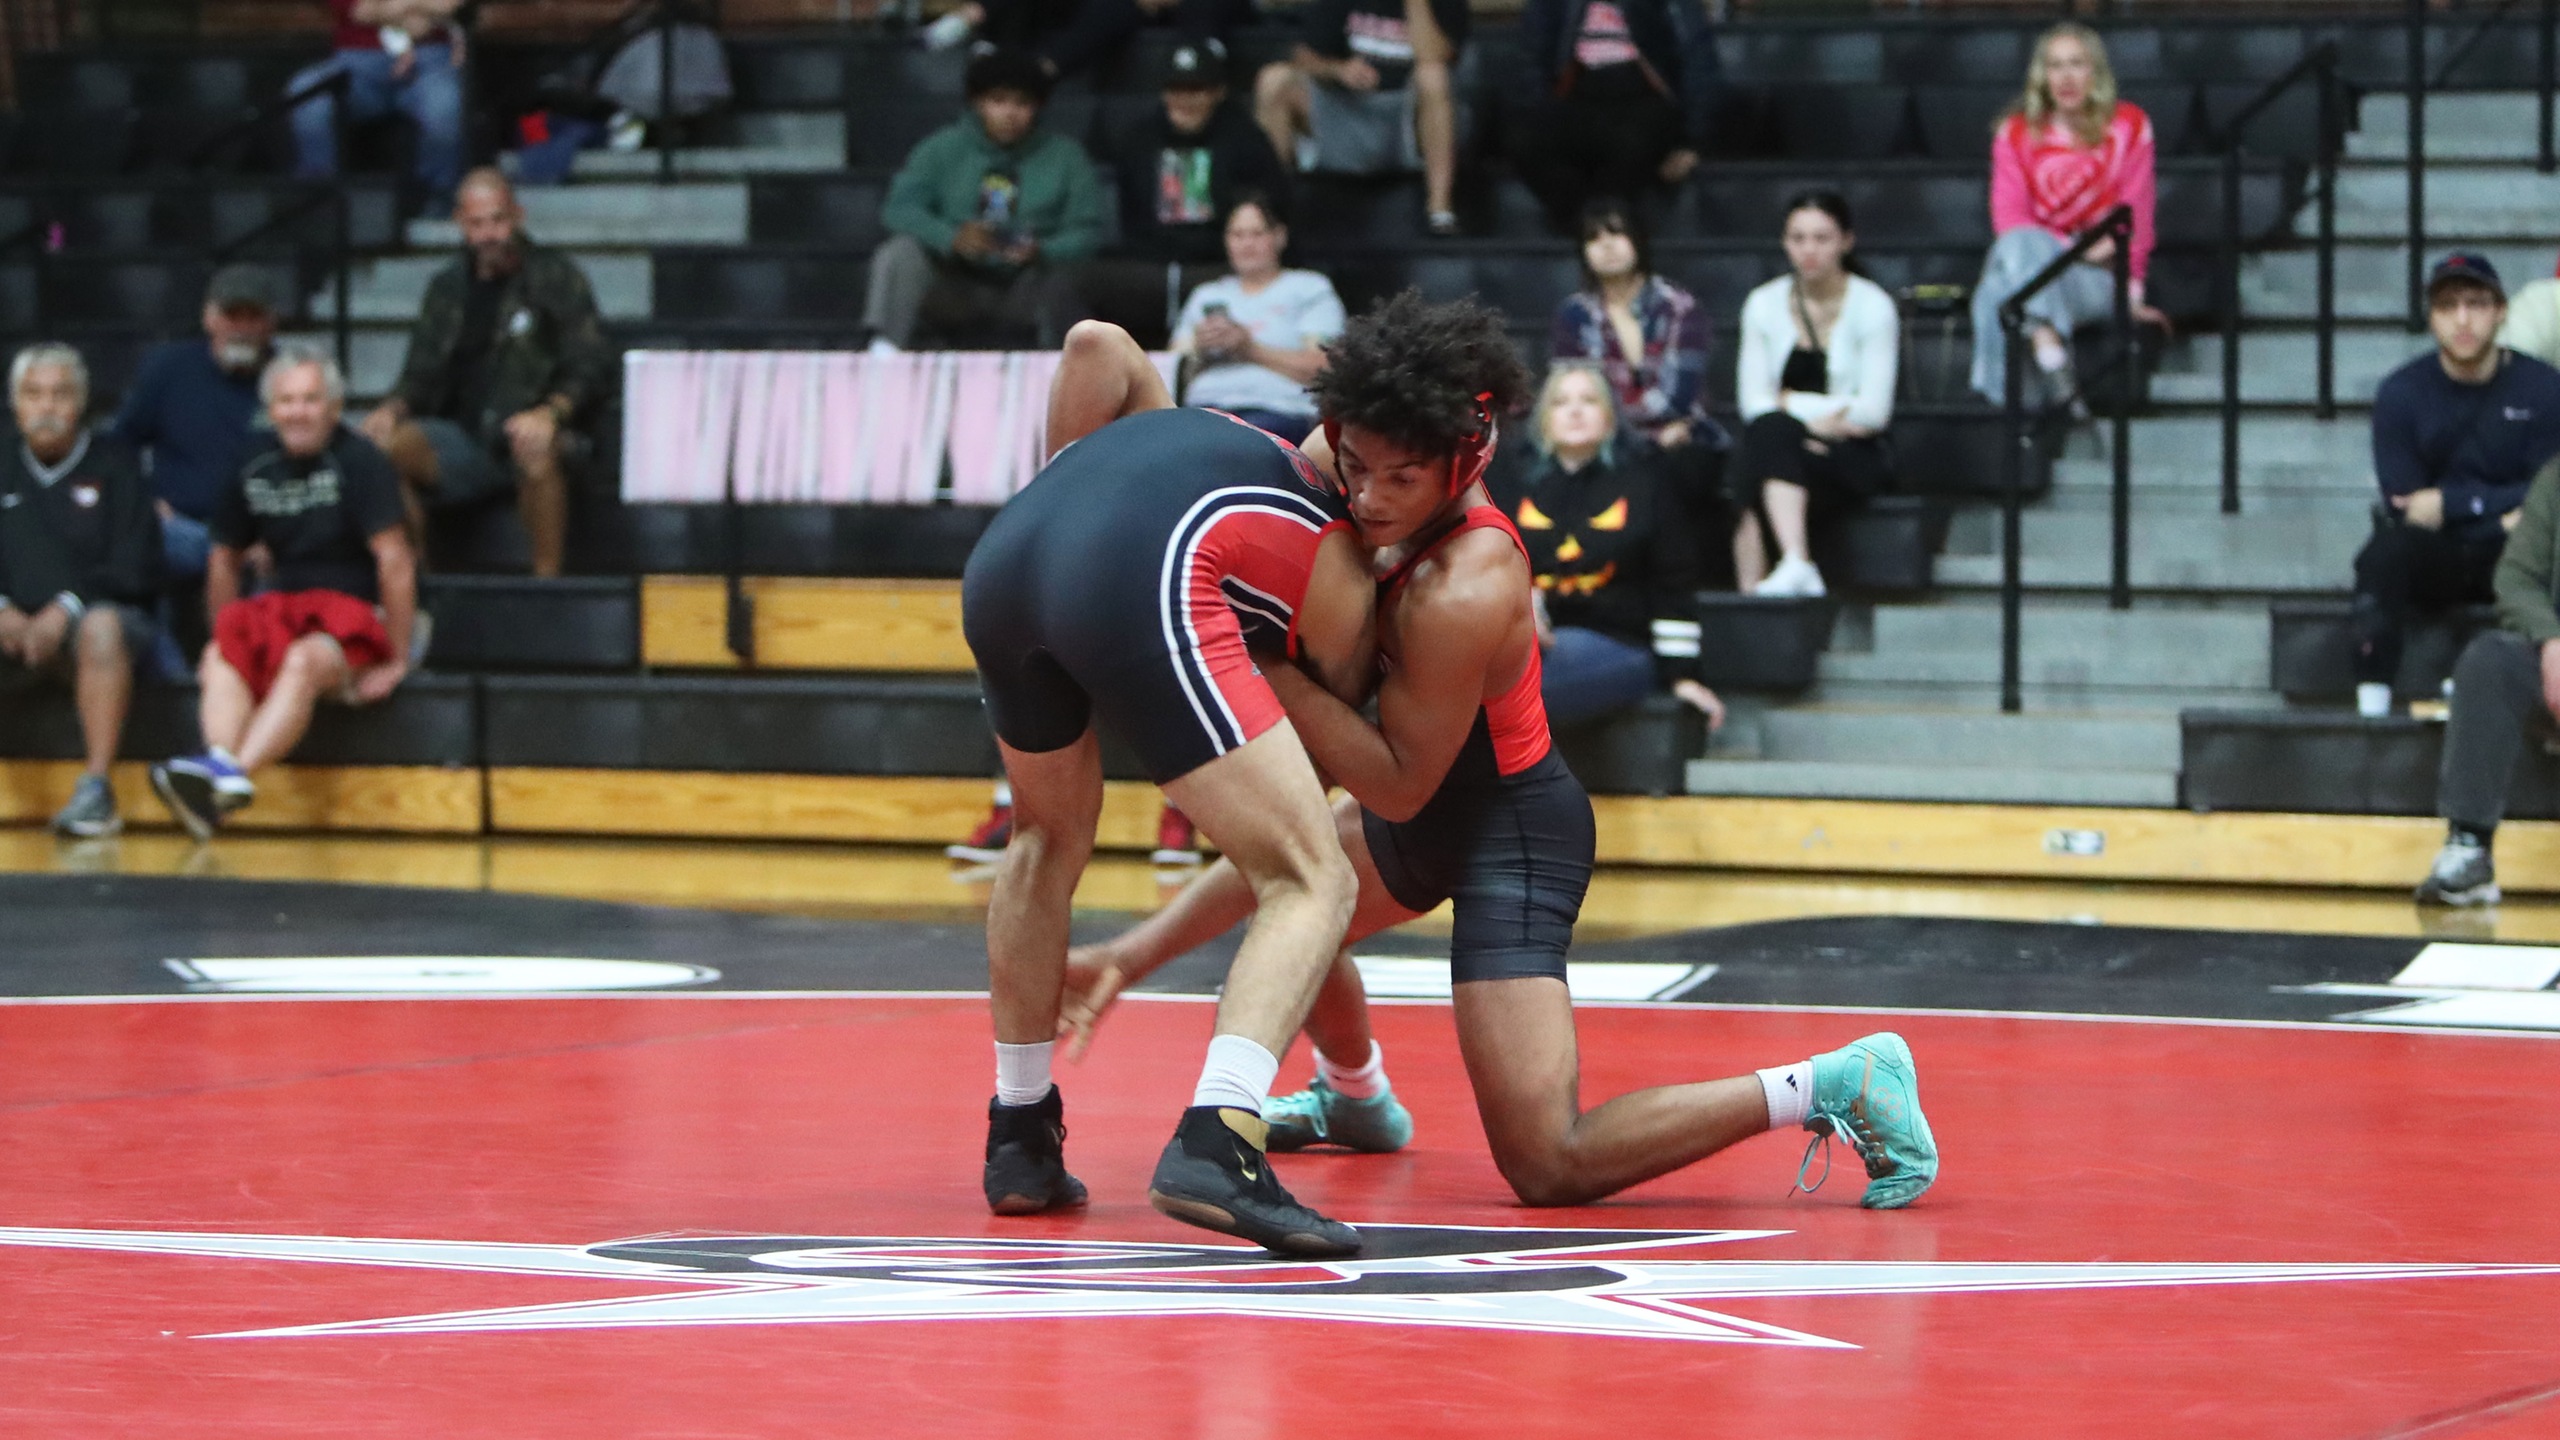 Dorian Parker pinned his opponent last week against Santa Ana College. Photo by Hugh Cox.